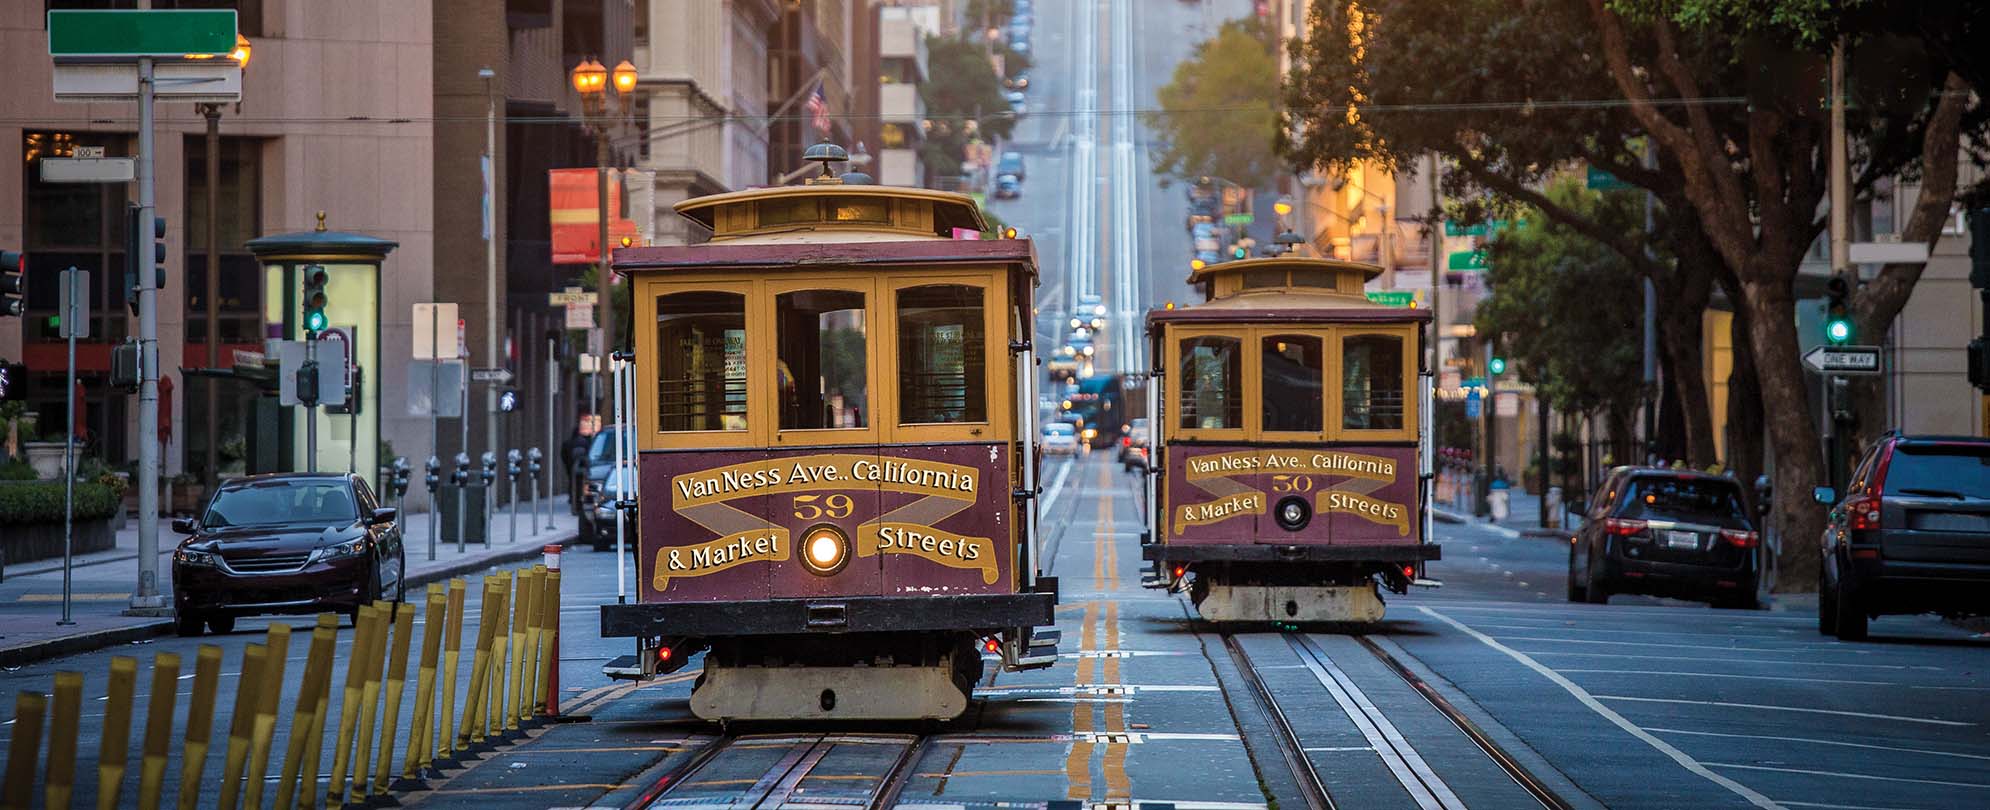 Two cable cars on the San Francisco cable car system.